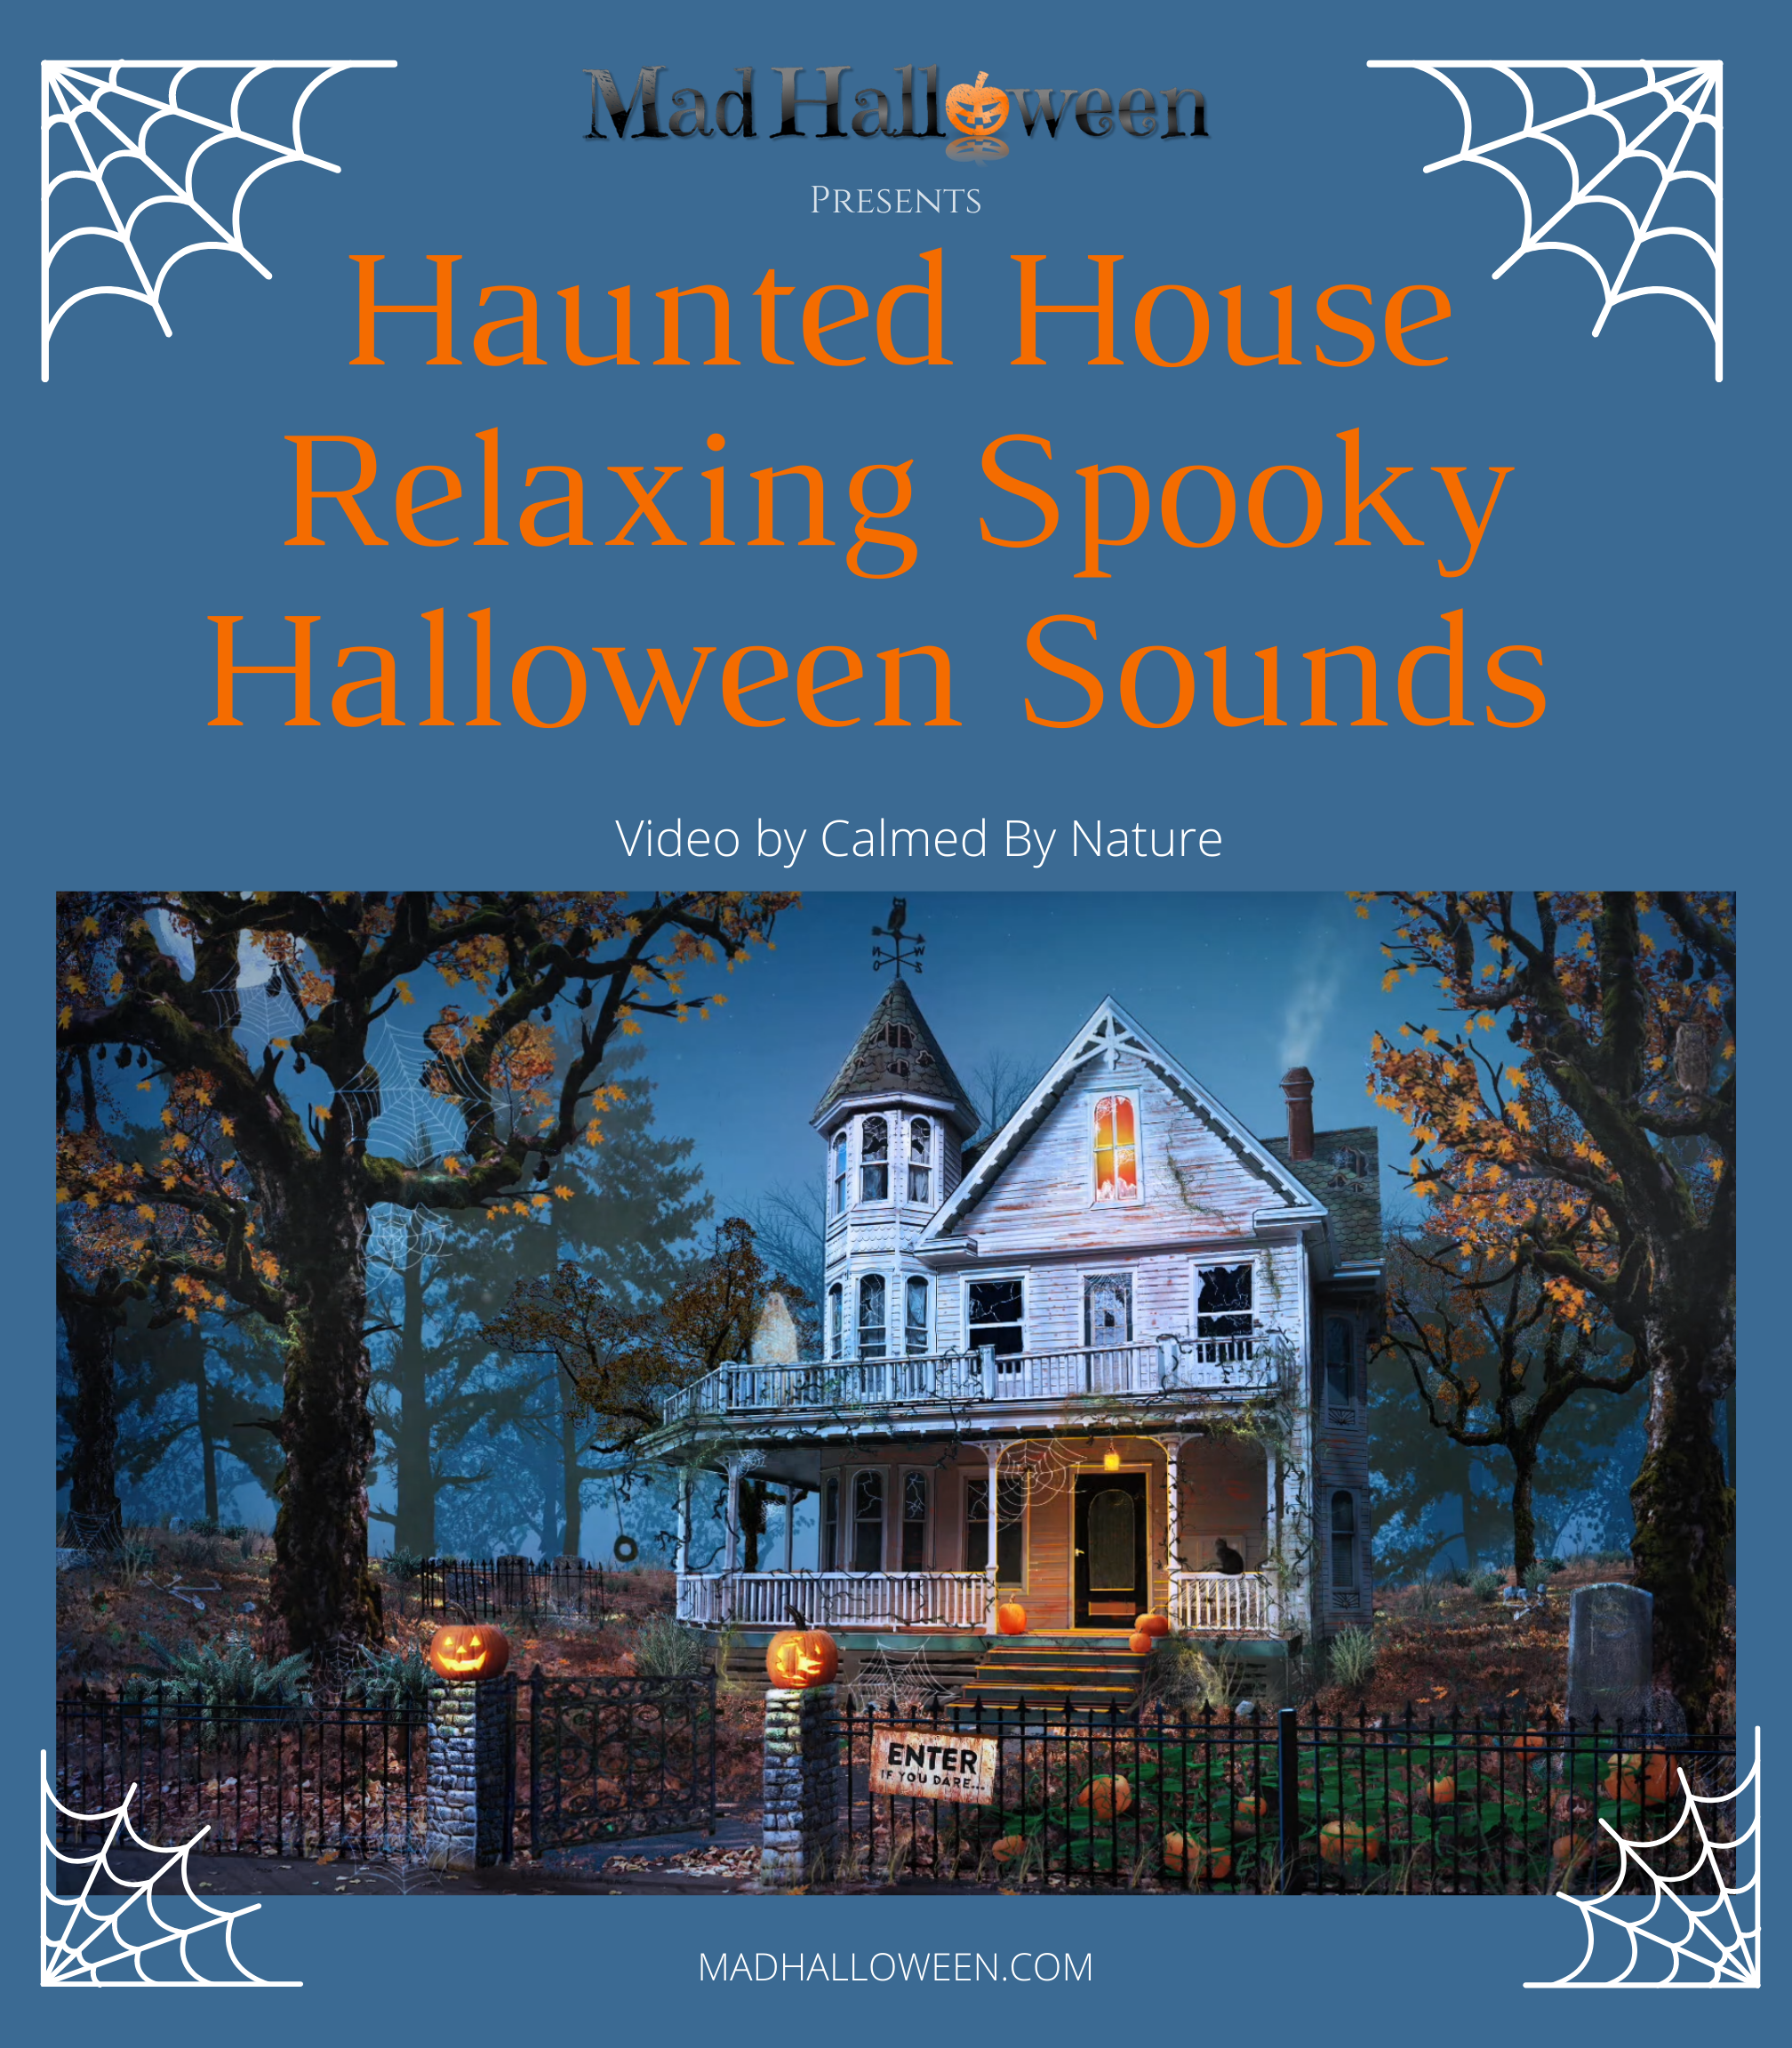 Haunted House Relaxing Spooky Halloween Sounds - Mad Halloween